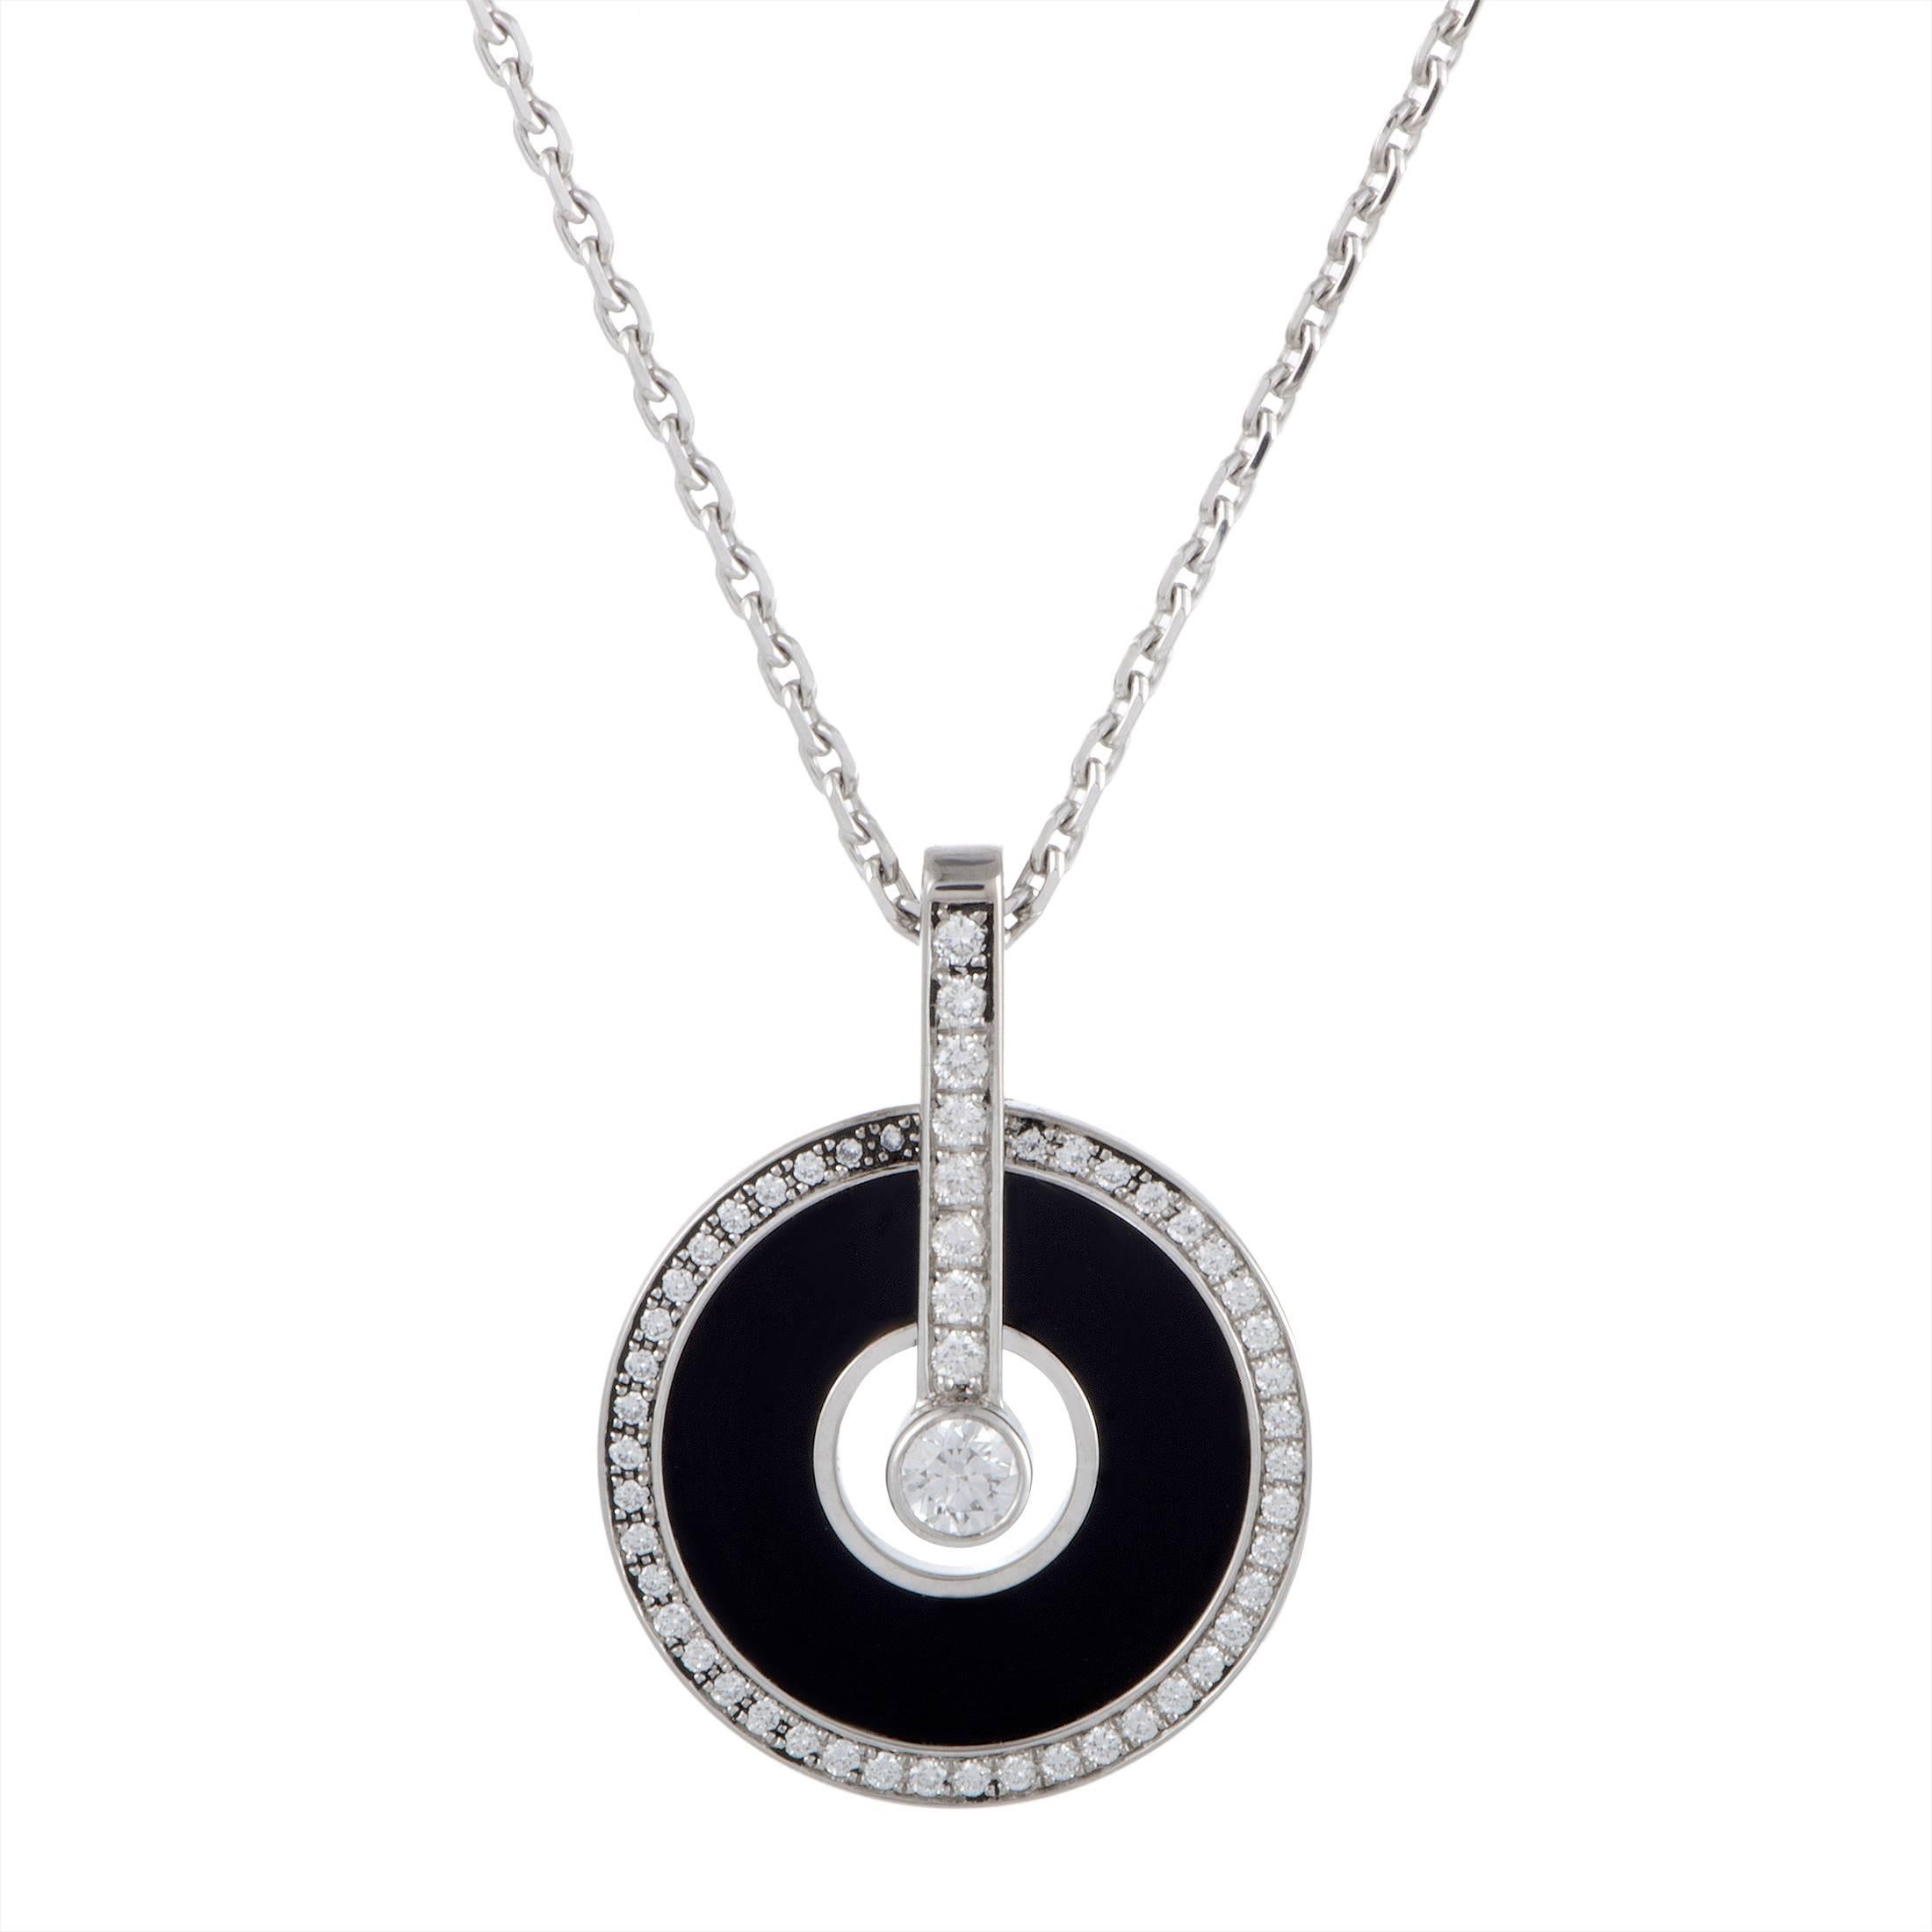 Piaget Limelight Diamond and Onyx White Gold Pendant Necklace